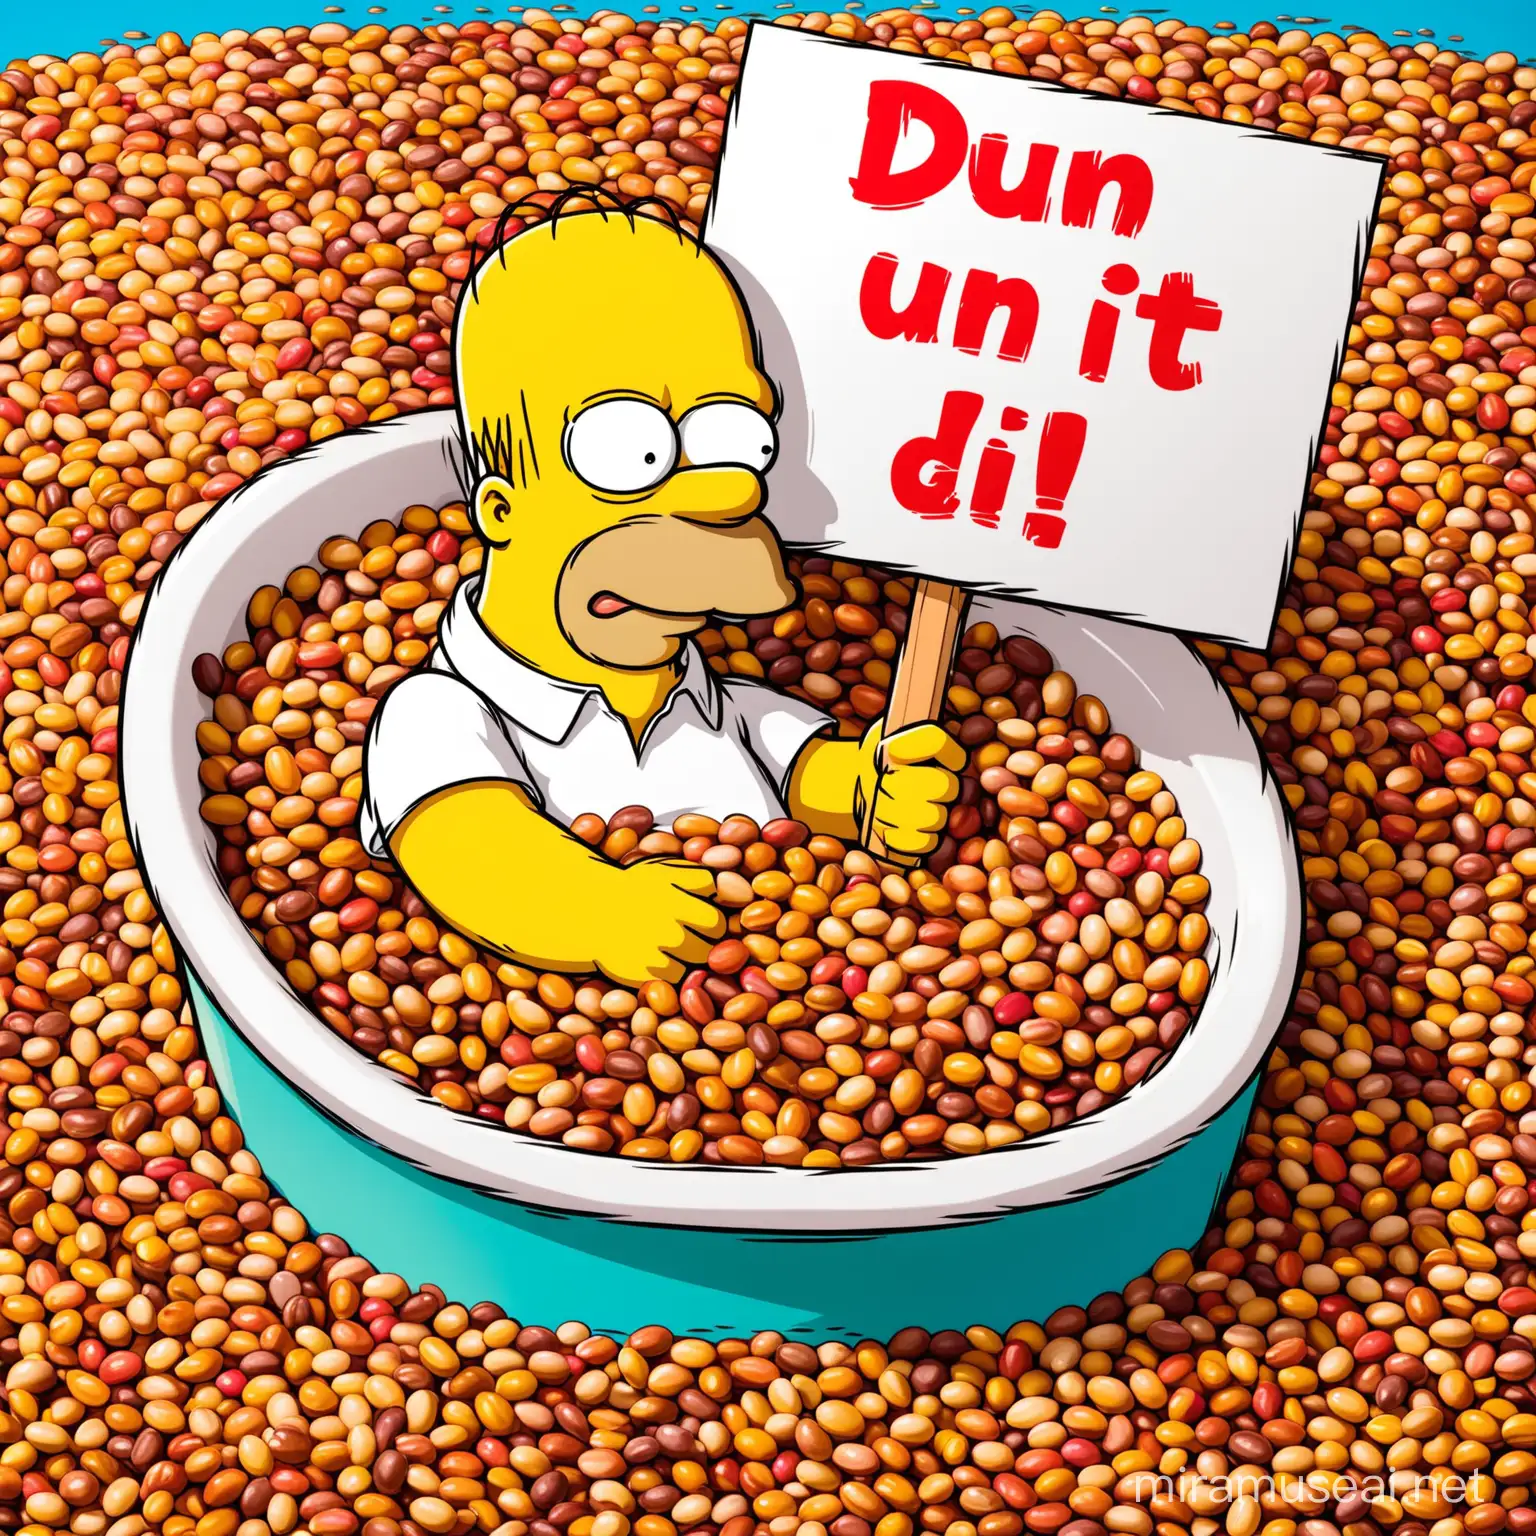 Homer Simpson in a bath of beans holding a sign that says "Dun it"